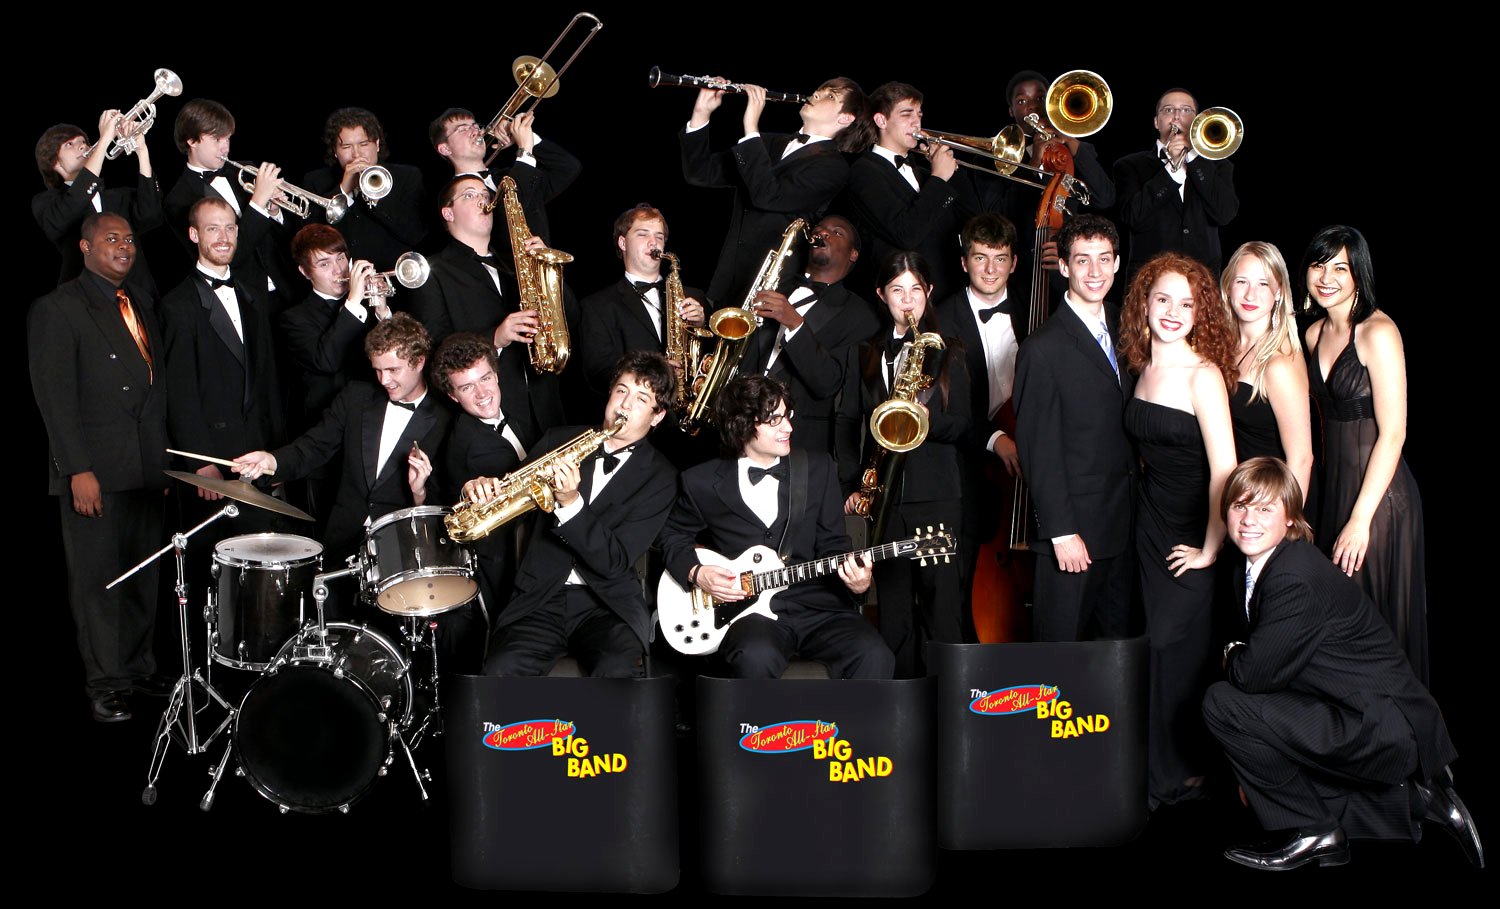 Toronto All Star Big Band Google image from http://www.regenerationcs.org/wp-content/uploads/toronto-all-star-big-band.jpg